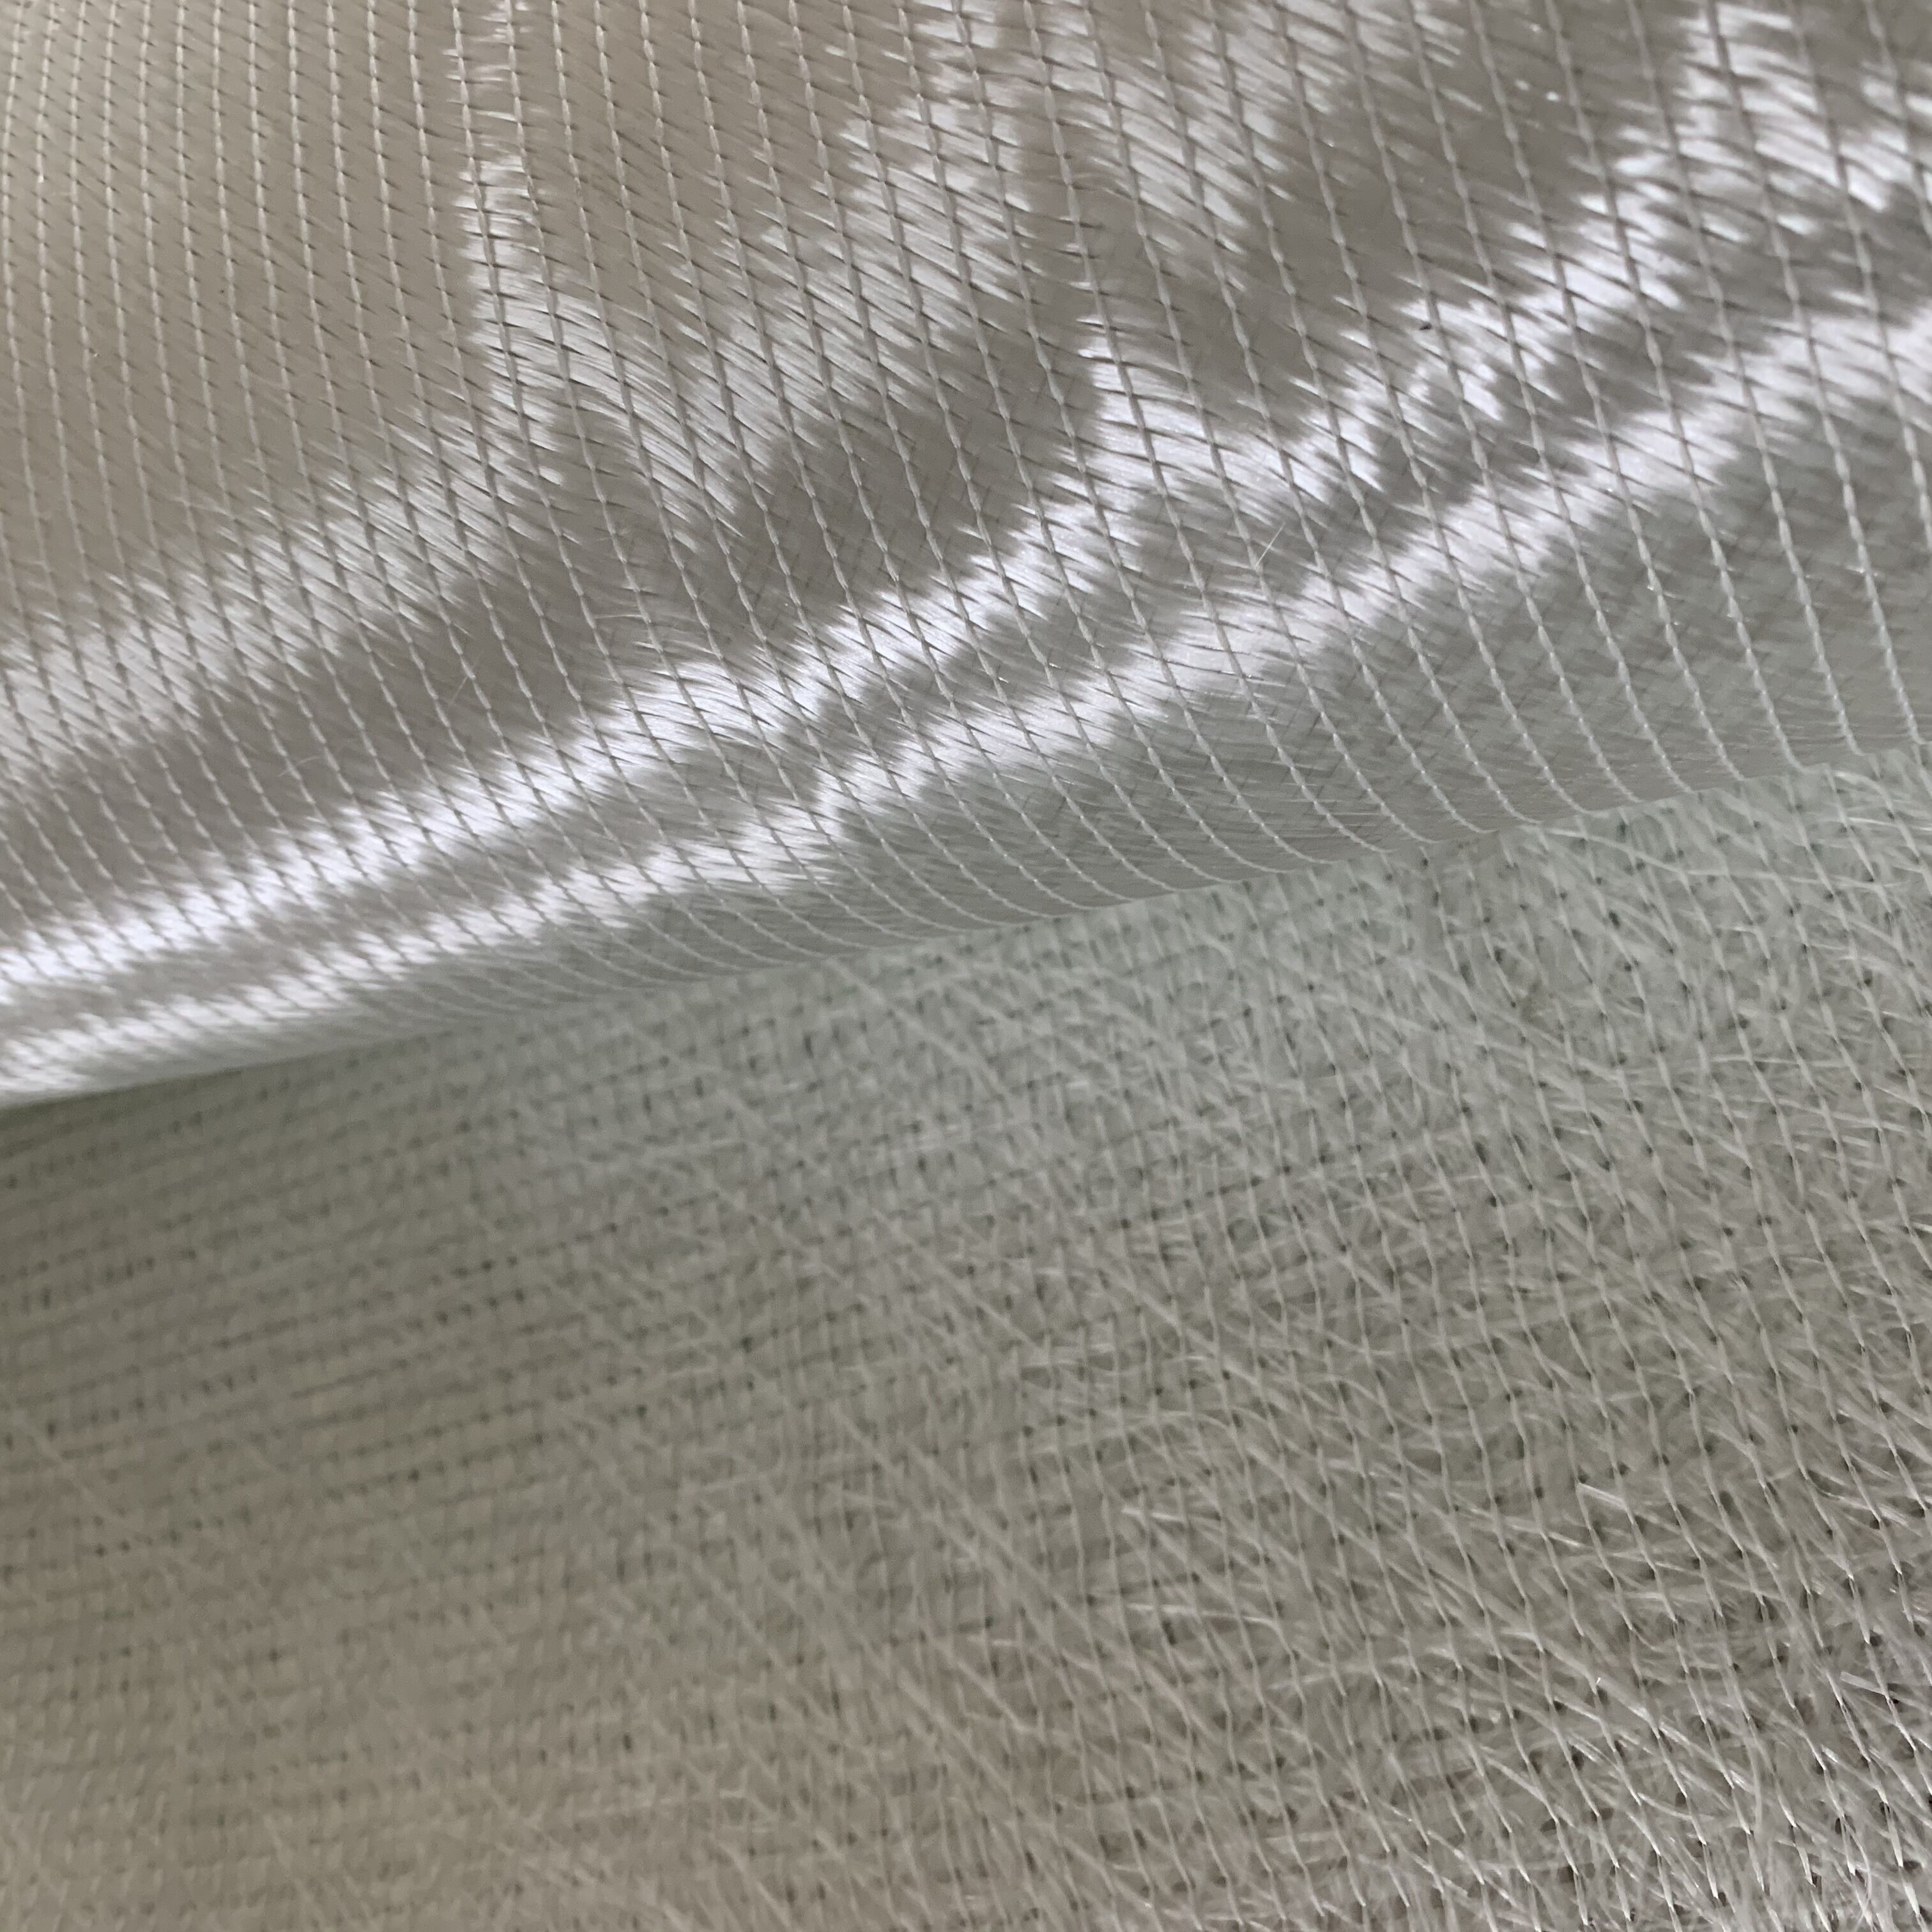  E-Glass C-Glass Combined with Vinyl Resin Fiberglass Multiaxial Fabric